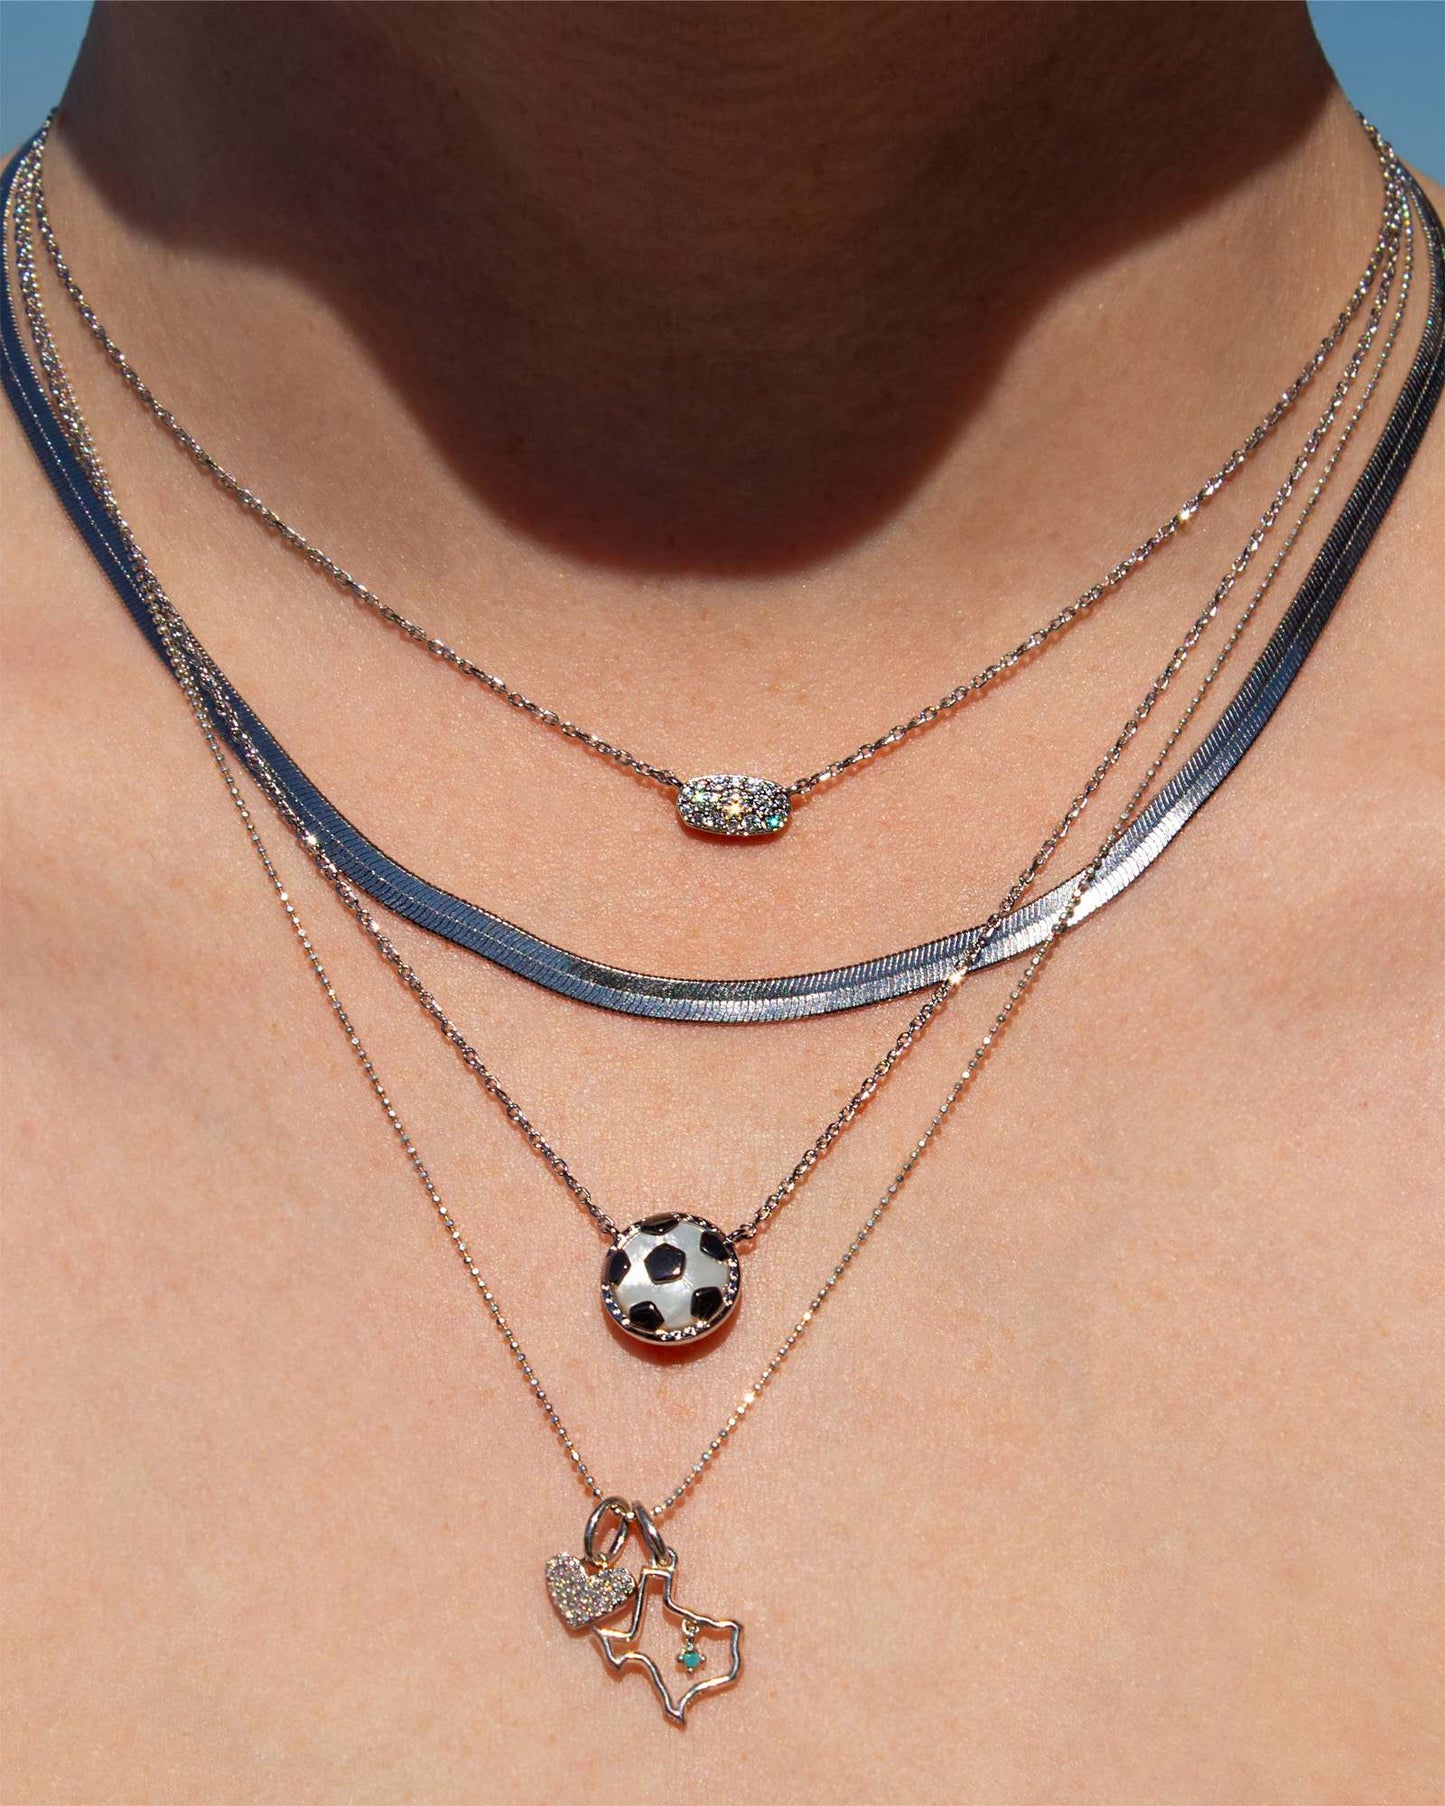 Soccer Silver Short Pendant Necklace in Ivory Mother-of-Pearl